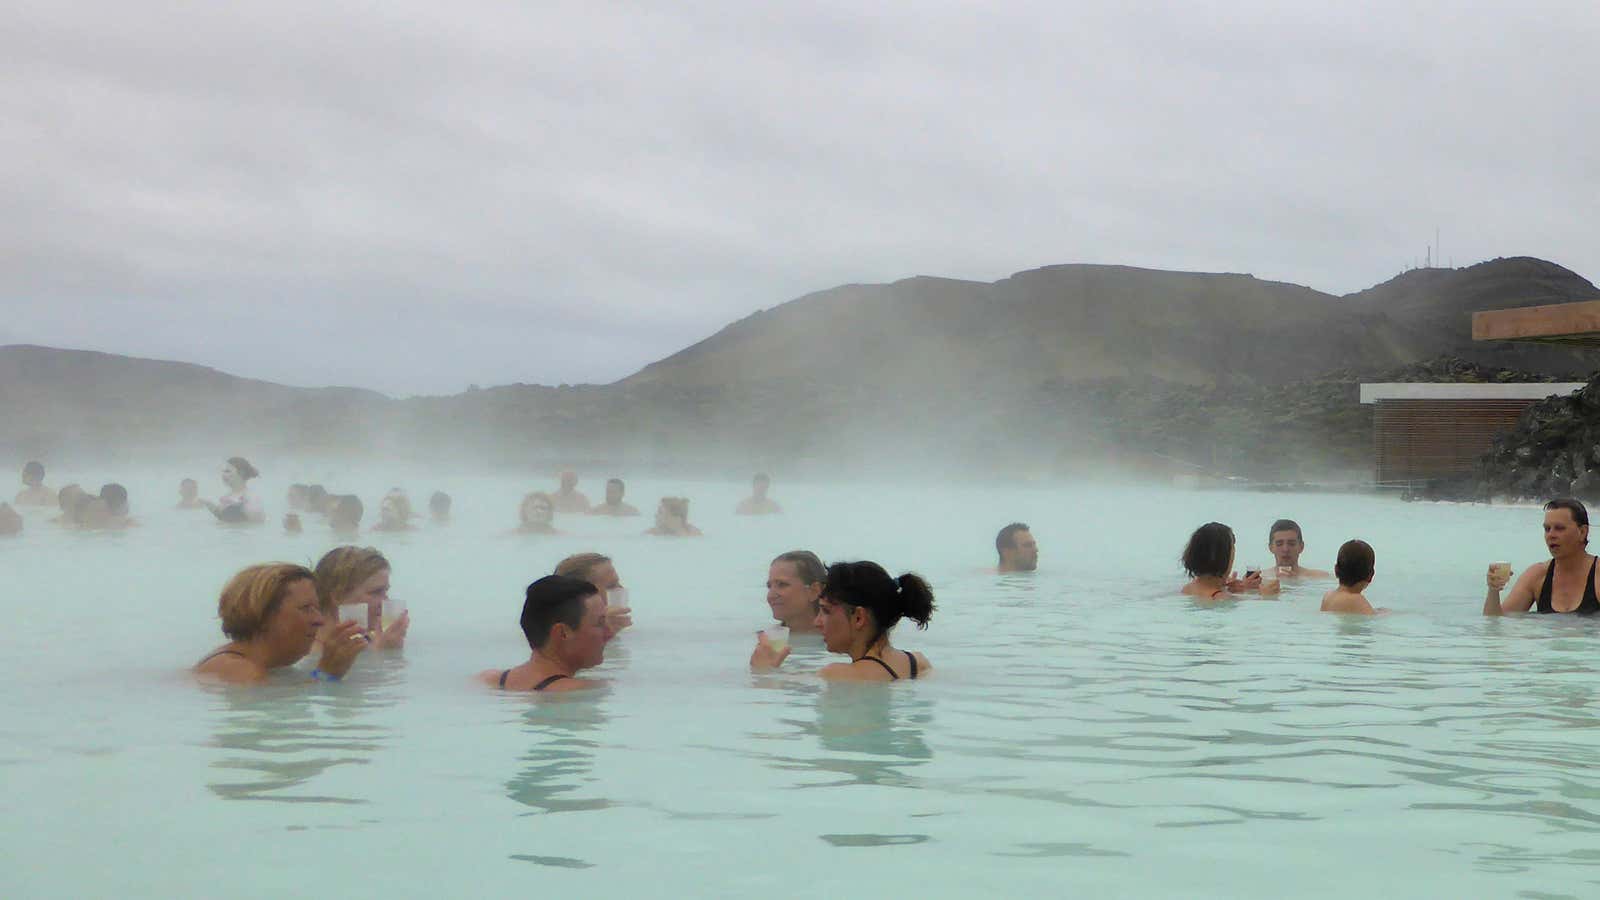 Visitors enjoy a drink in the Blue Lagoon geothermal spa in Grindavik, Iceland, May 25, 2016.